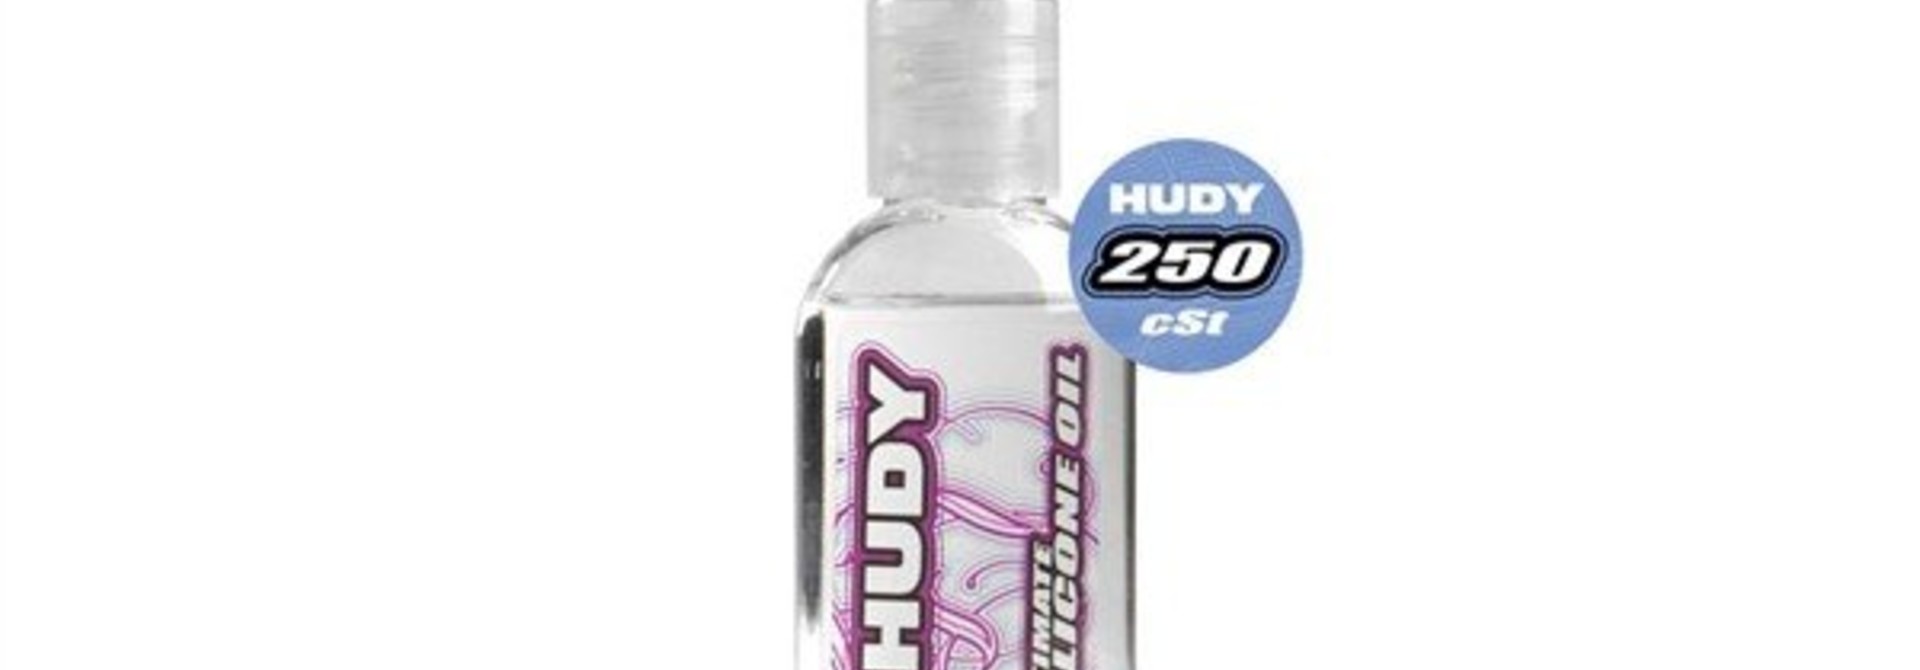 HUDY ULTIMATE SILICONE OIL 250 cSt - 50ML. H106325